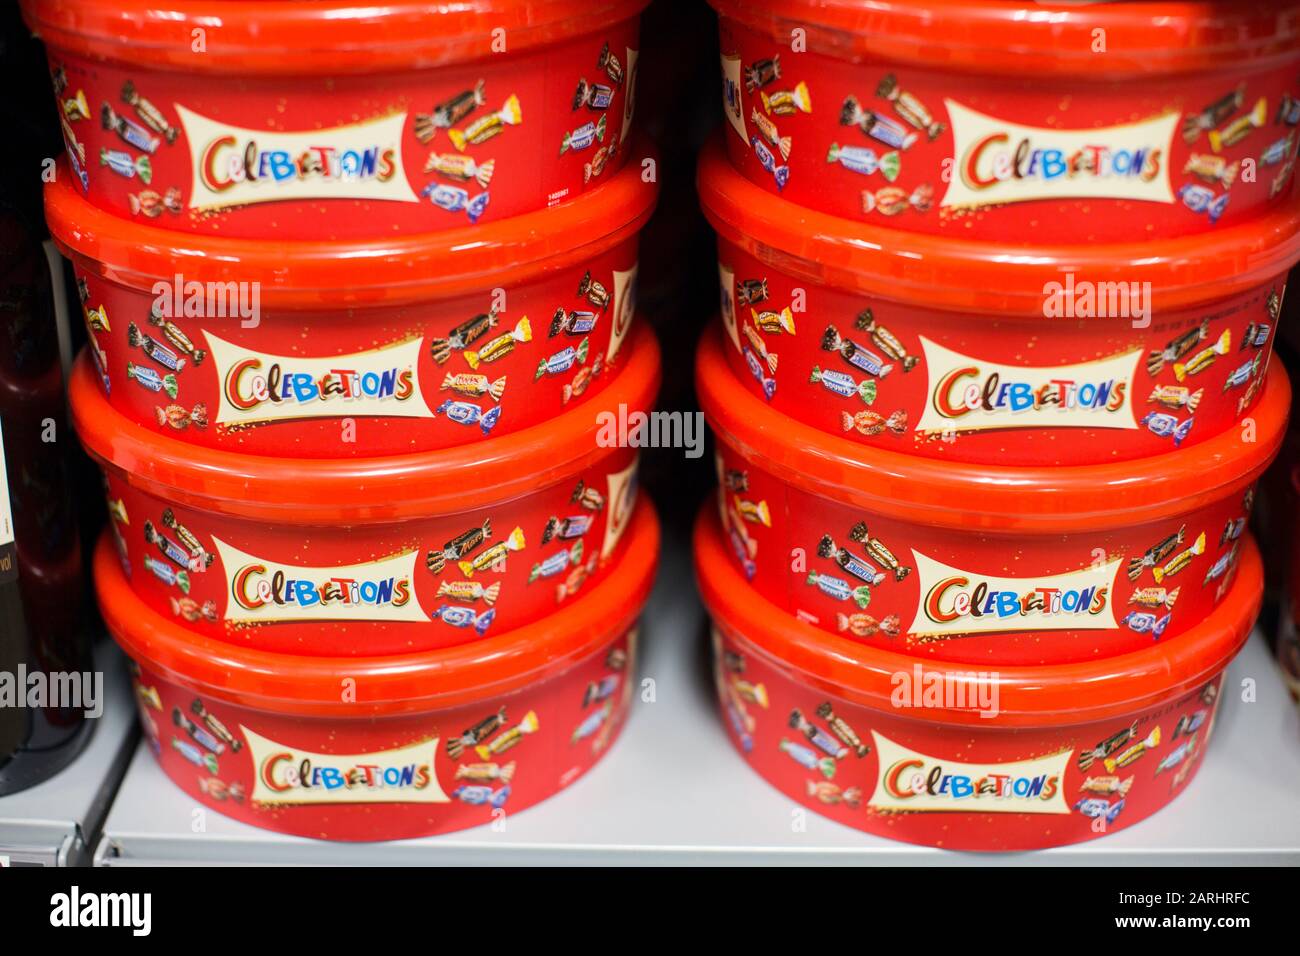 Tubs of Celebrations chocolates in a supermarket Stock Photo